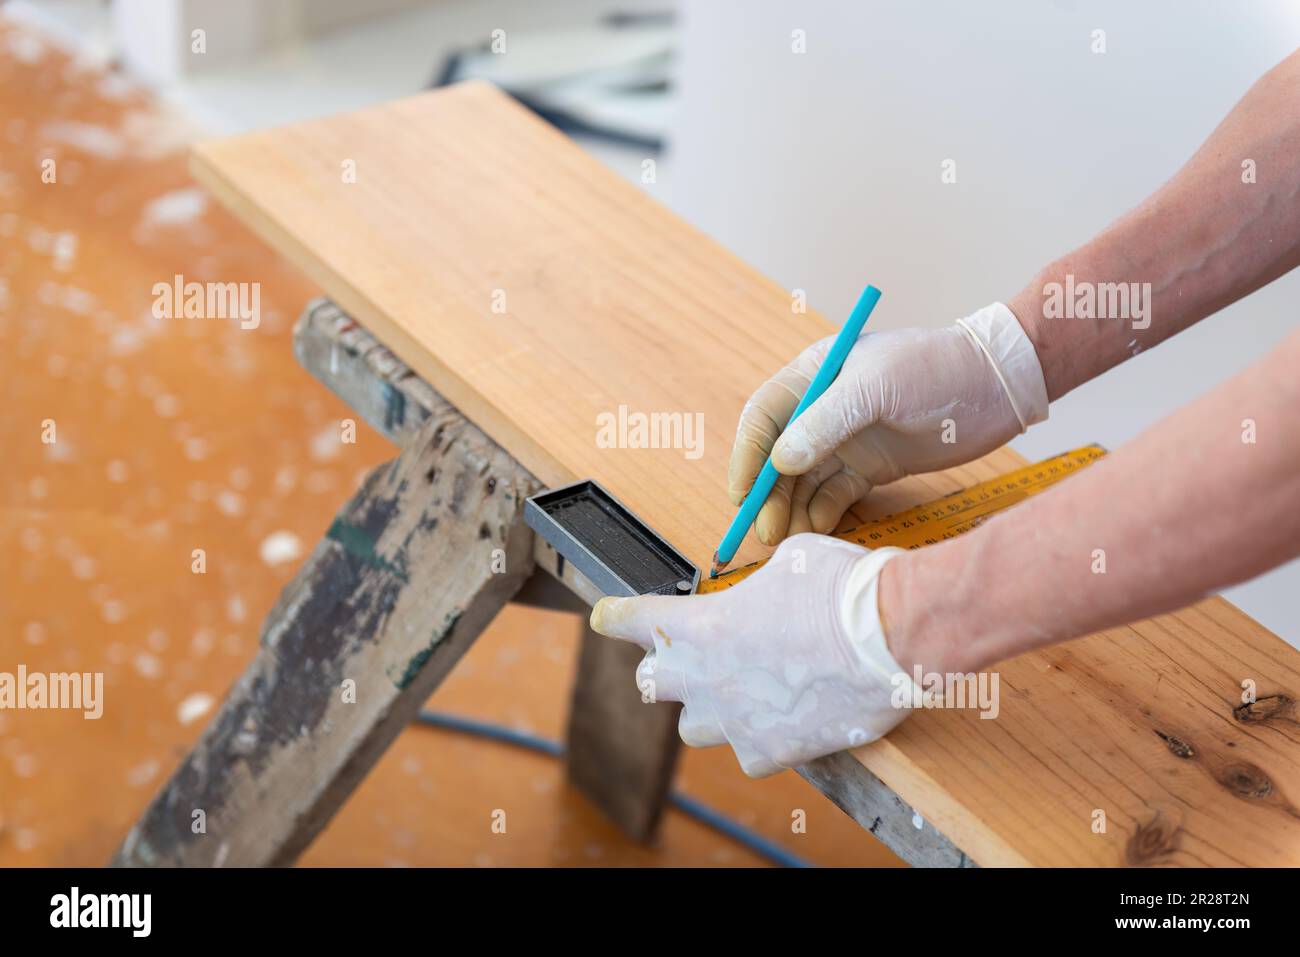 Hands of a builder marking the line on wood with pencil. Home refurbishment do it yourself project. Stock Photo